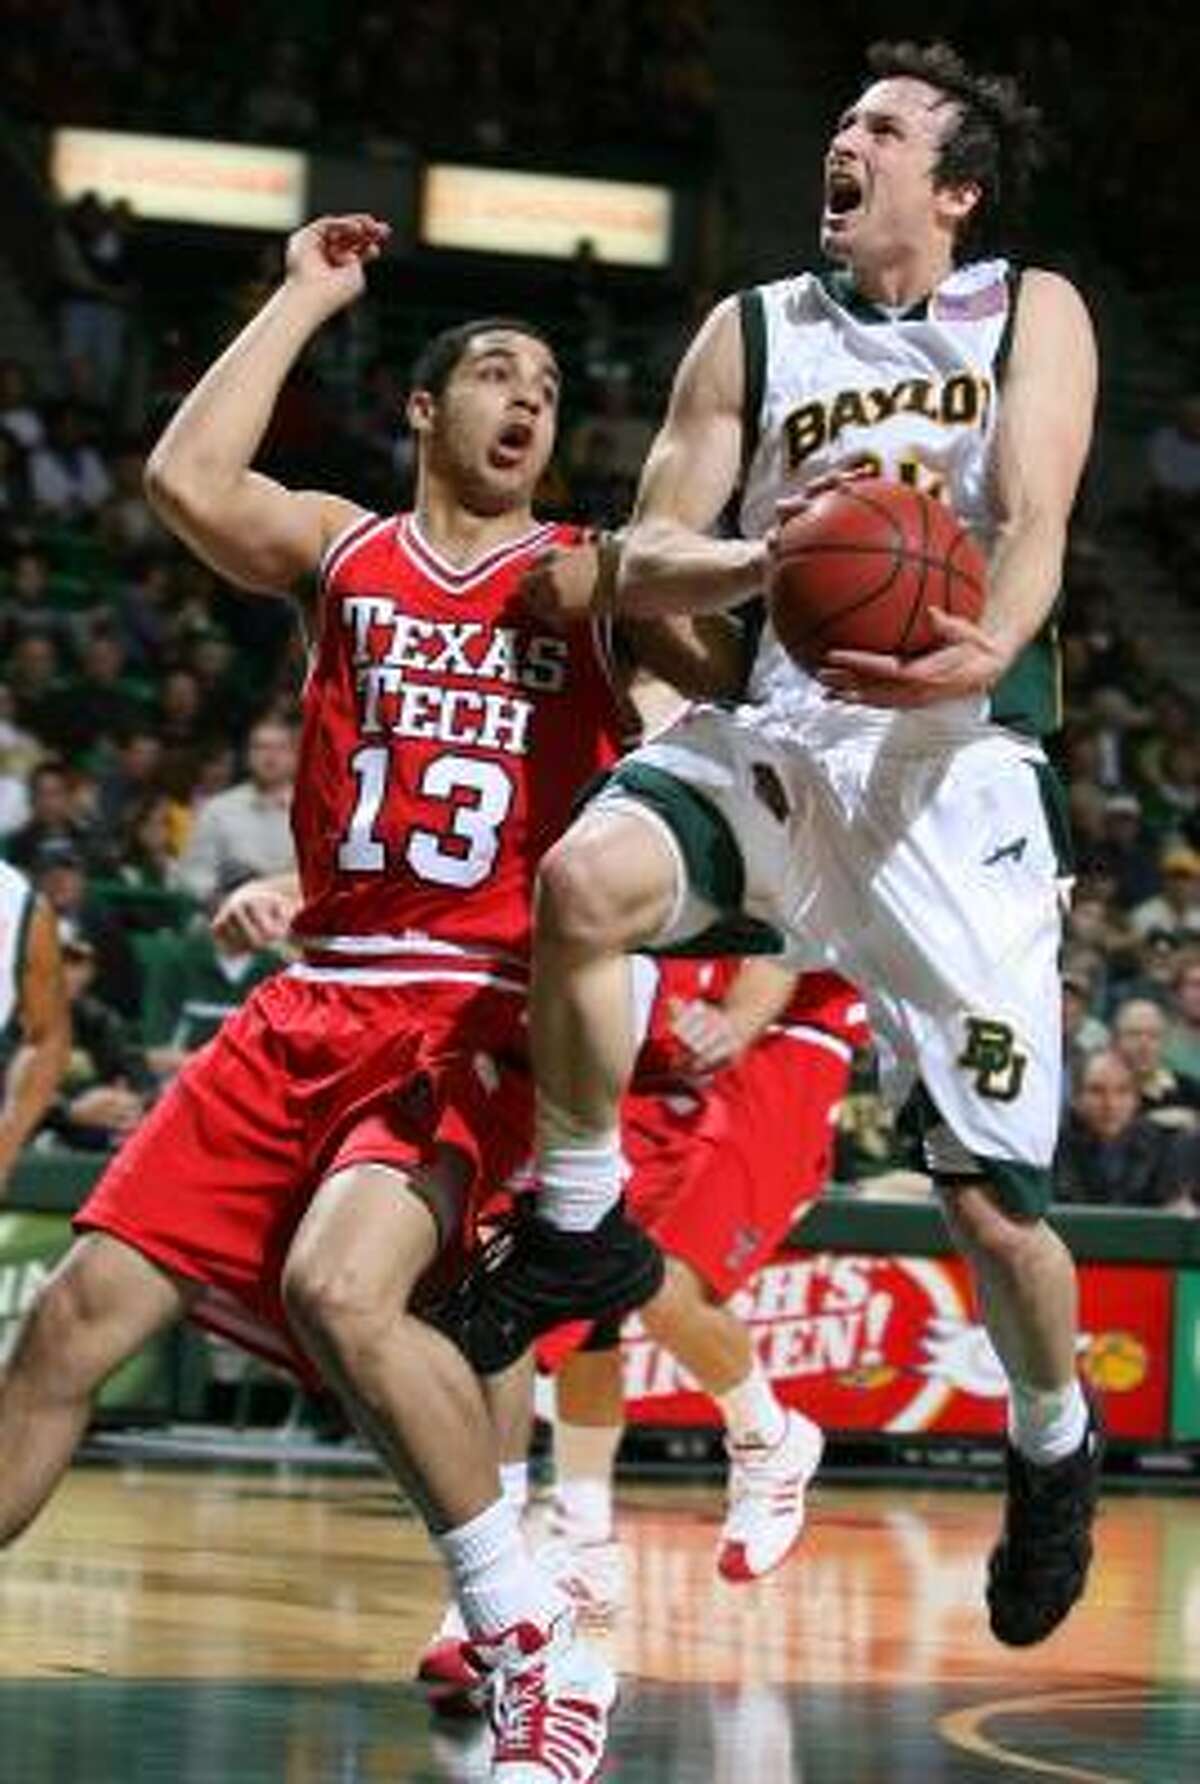 Aaron Bruce, who's from Australia, has made a major impact at Baylor.